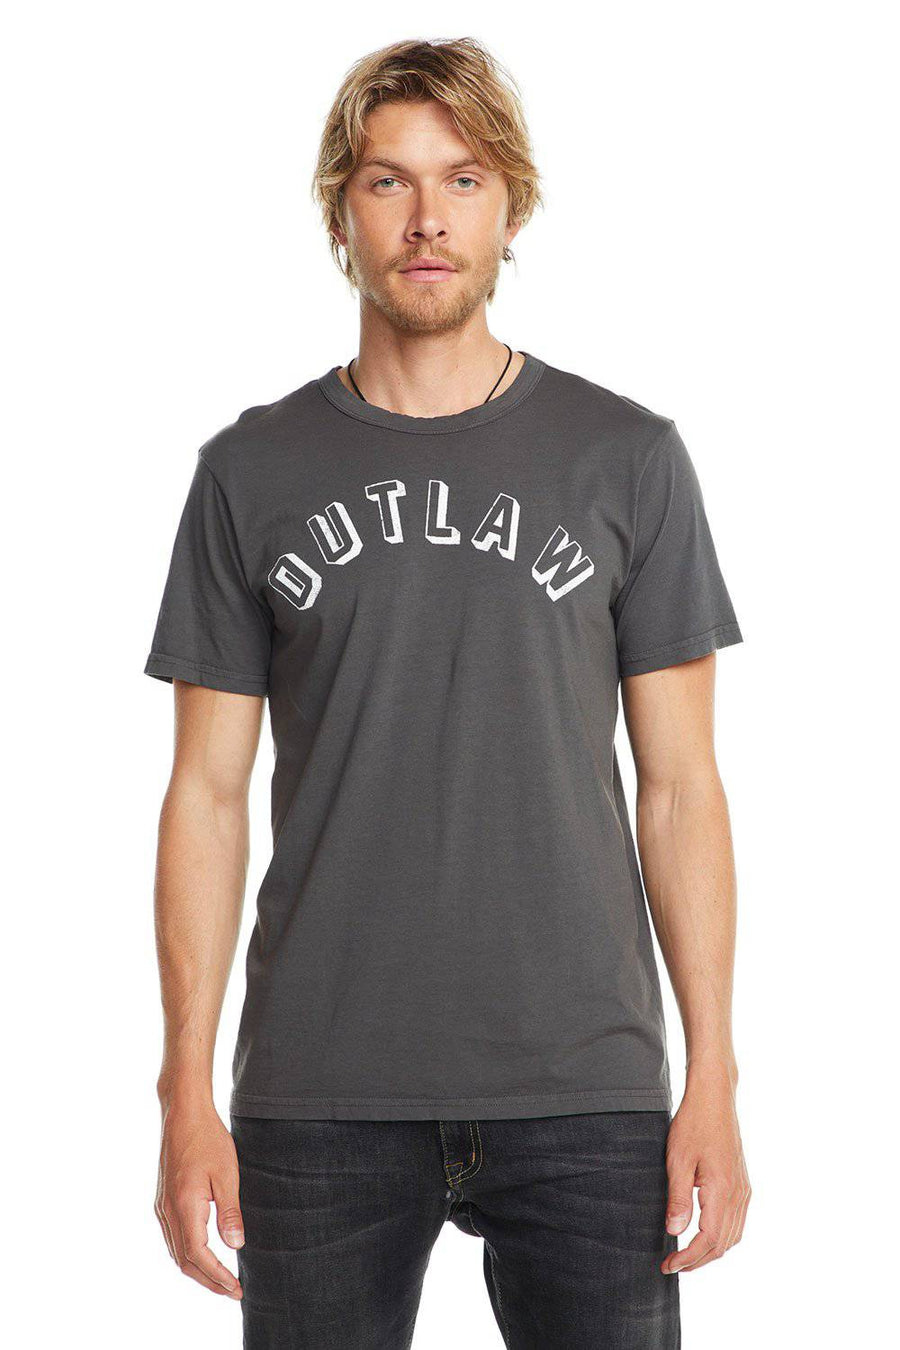 OUTLAW MENS chaserbrand